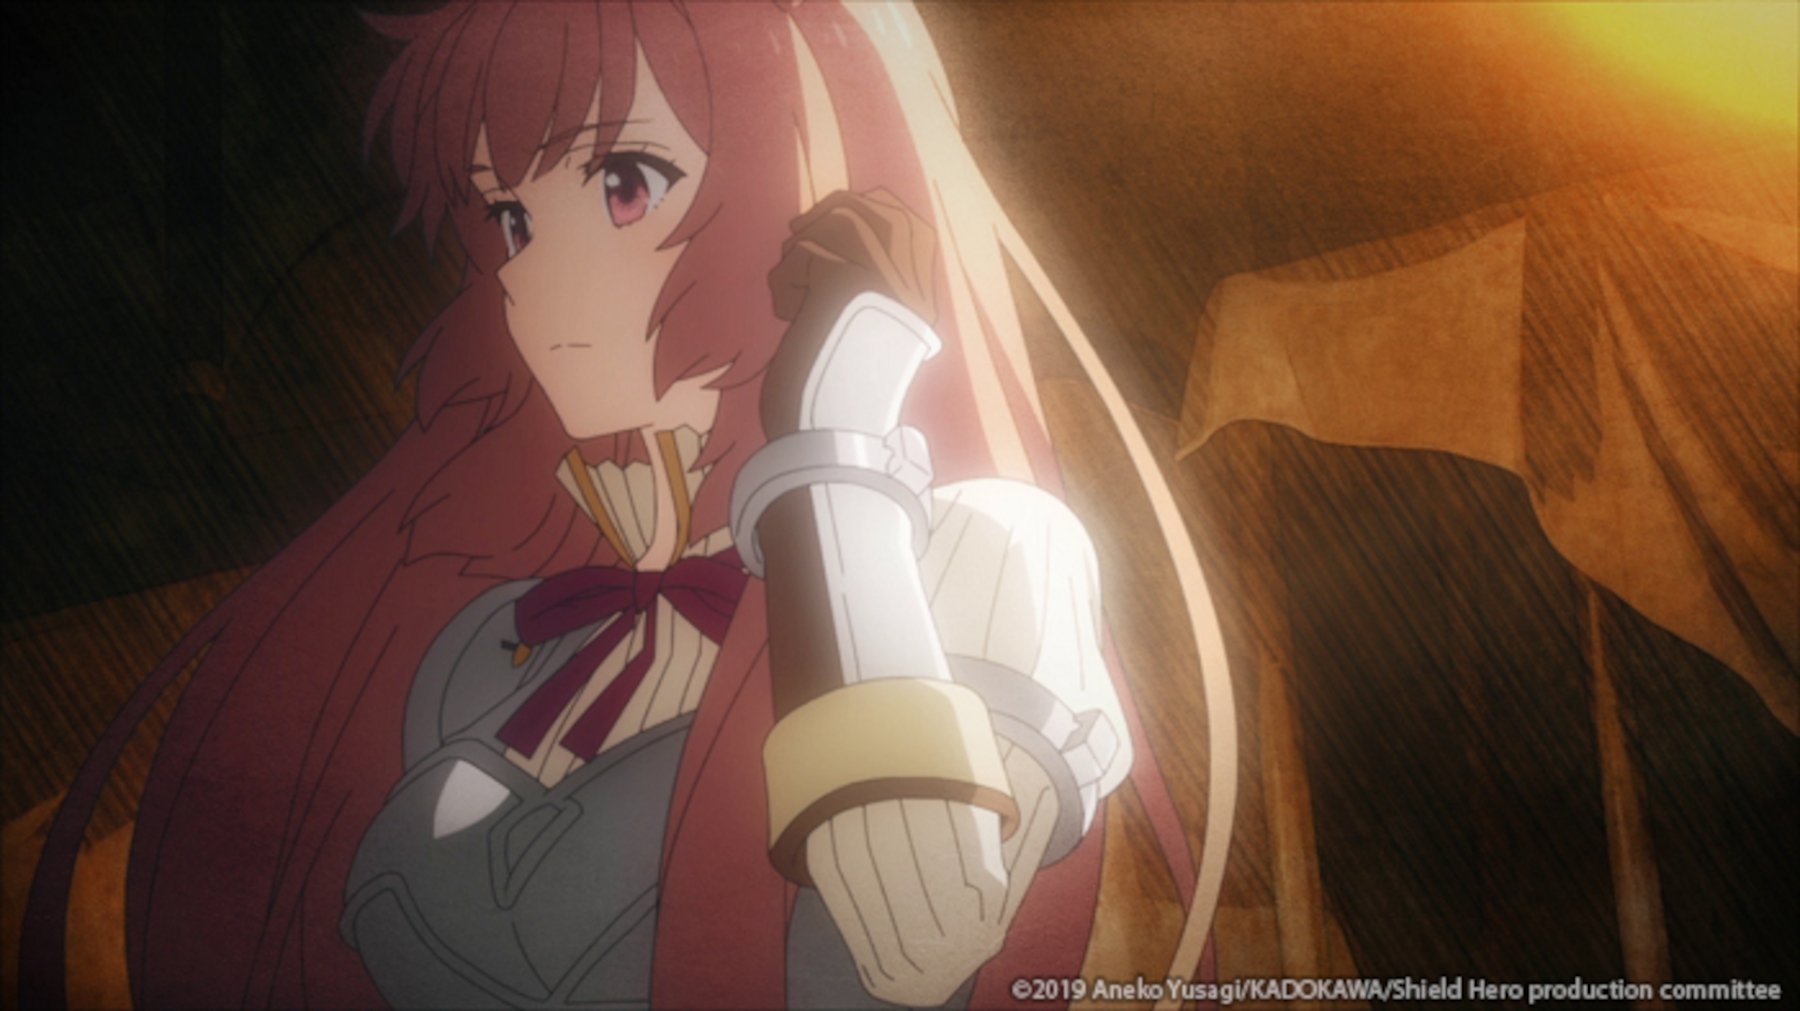 Raphtalia in 'The Rising of the Shield Hero,' which returns with season 2 episodes on April 6.